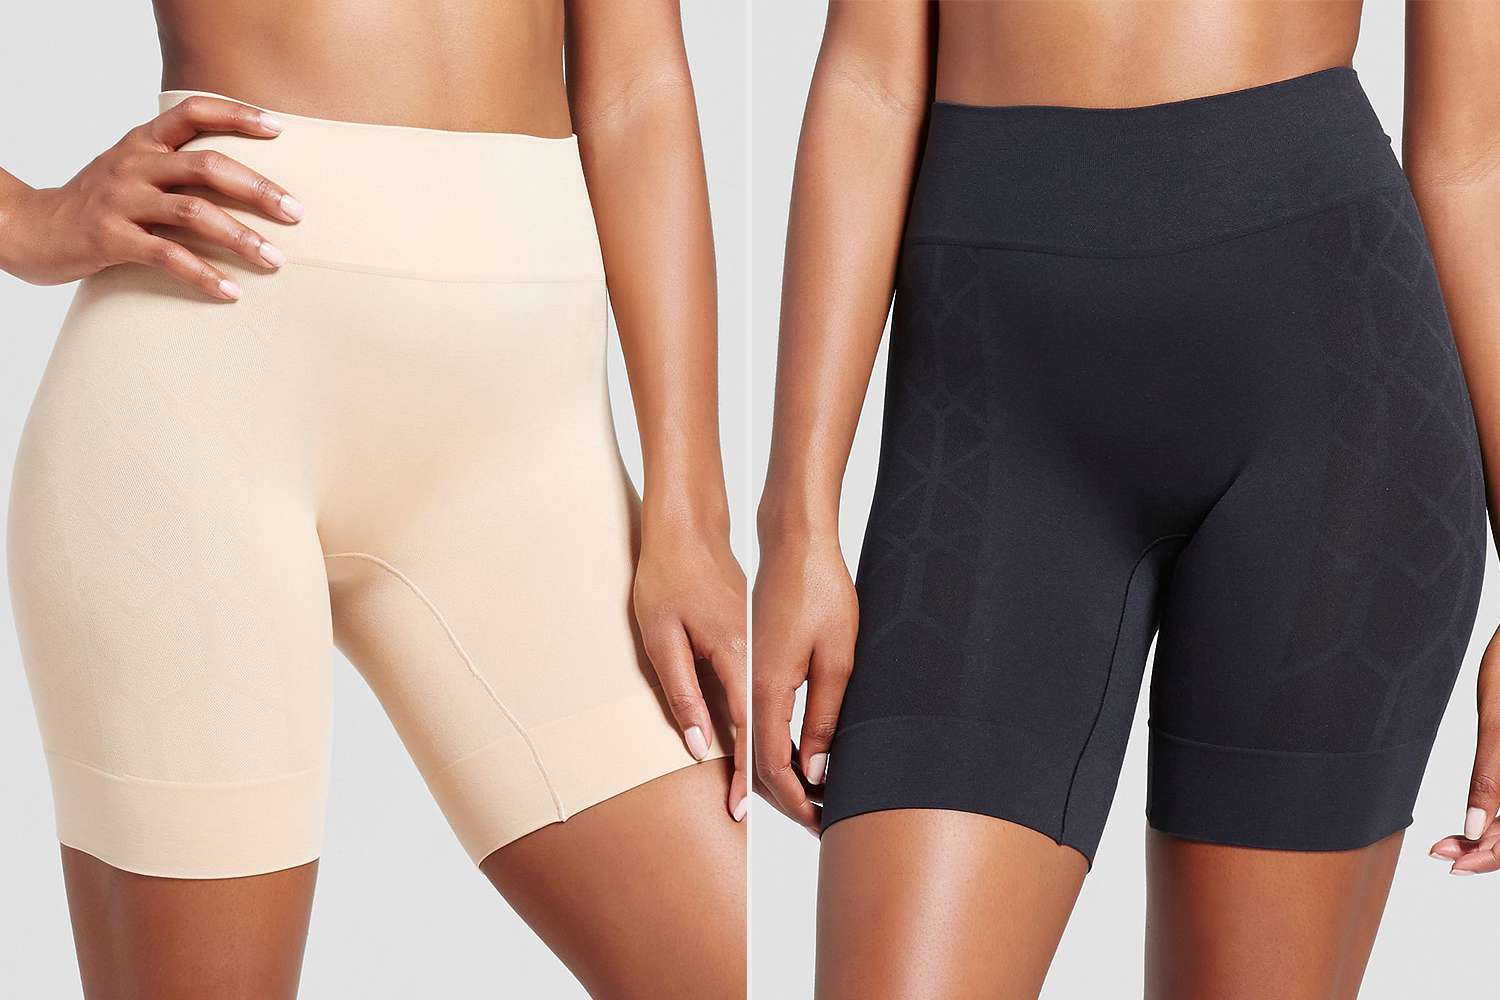 Comfy Under-Dress Anti-Chafing Shorts ...